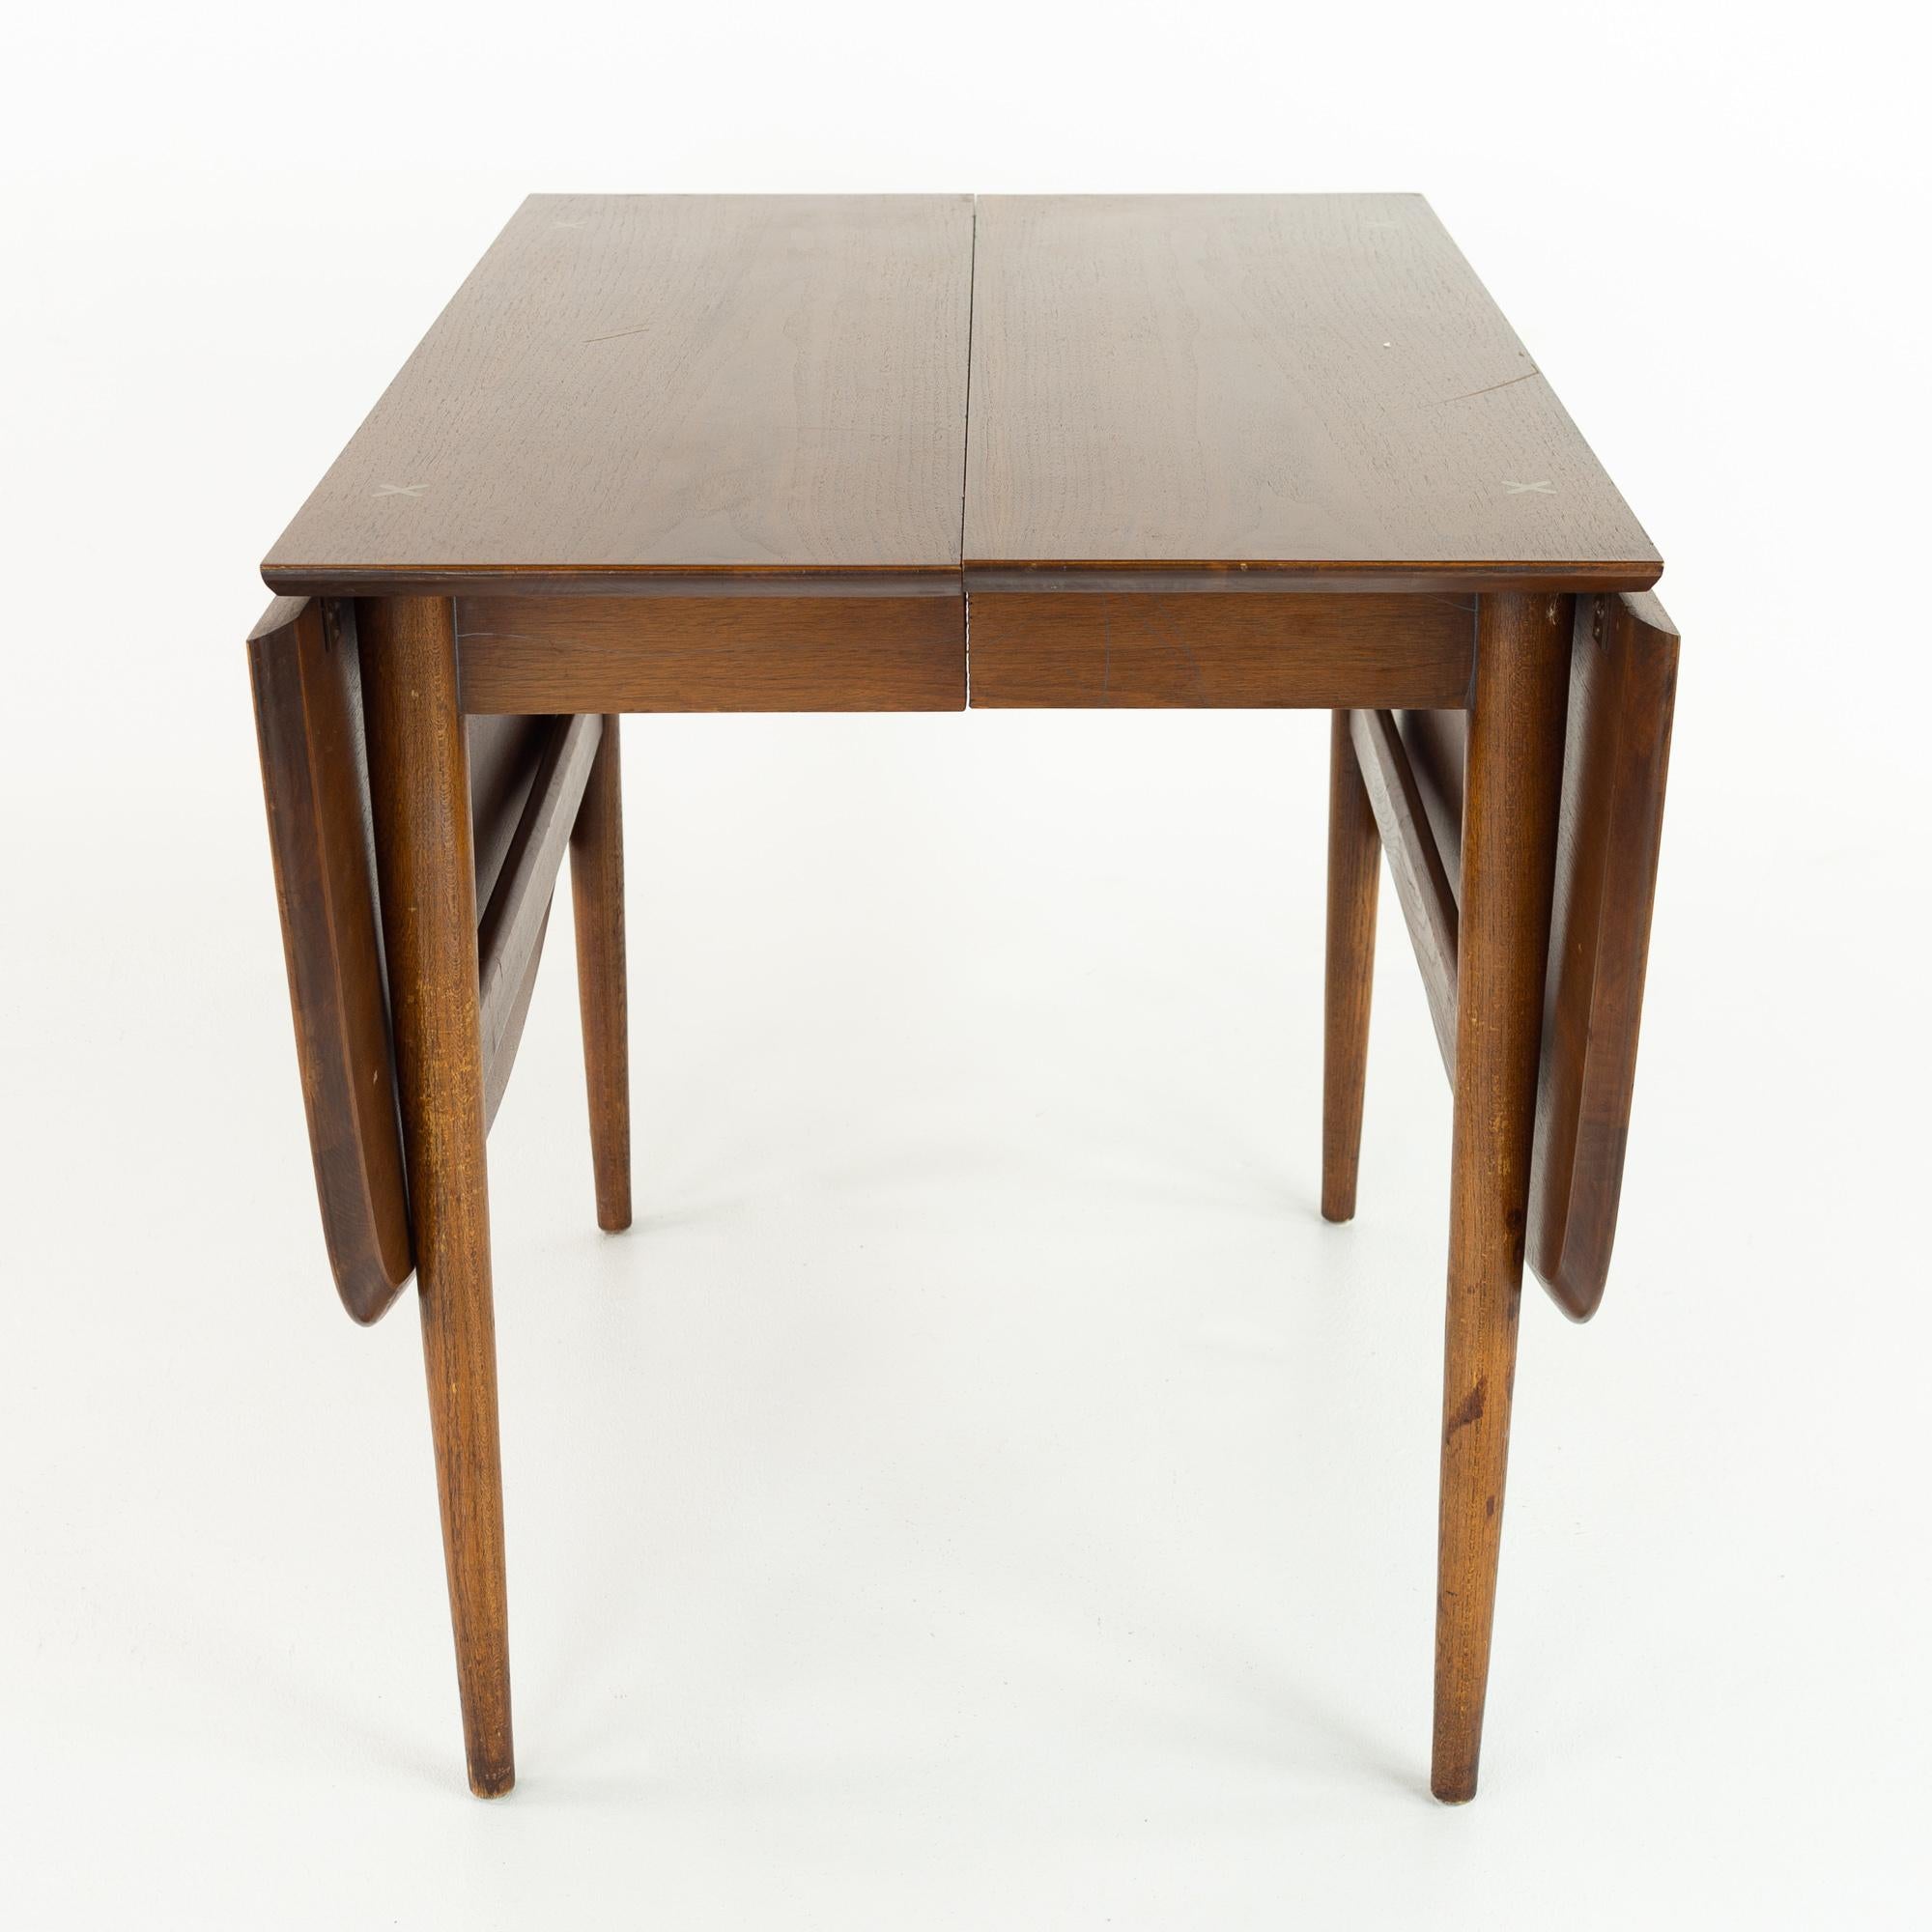 Merton Gershun for American of Martinsville mid century dining table with 2 leaves

This table measures: 61.5 wide x 40 deep x 29.75 inches high,with a chair clearance of 25.5 inches; each leaf is 12 inches wide, making a maximum table width of